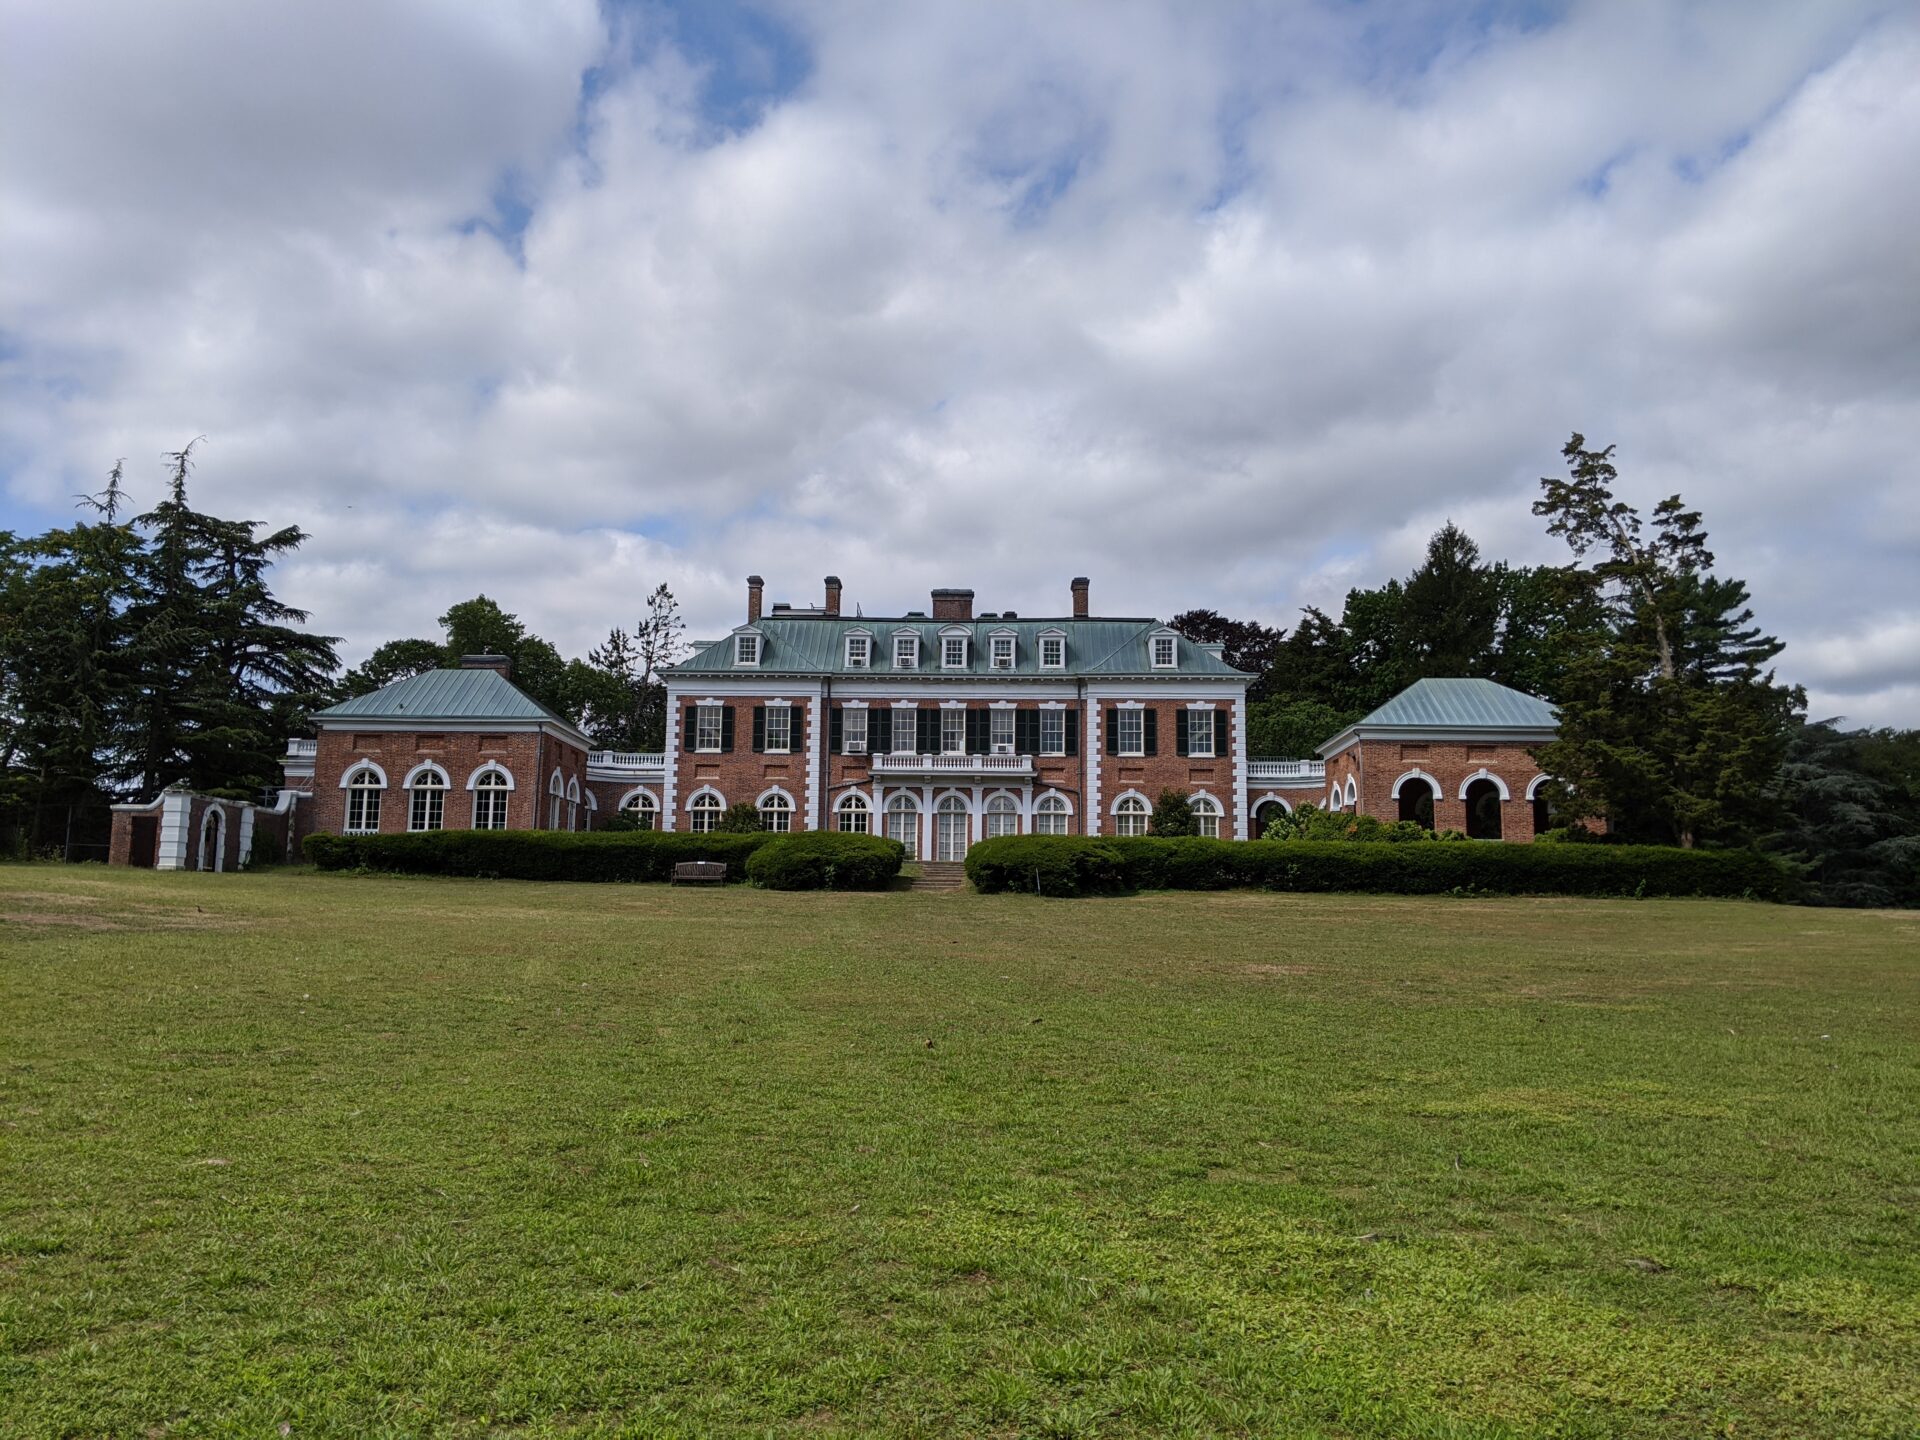 the view of the main building of the nassau county museum of art, lawn in front